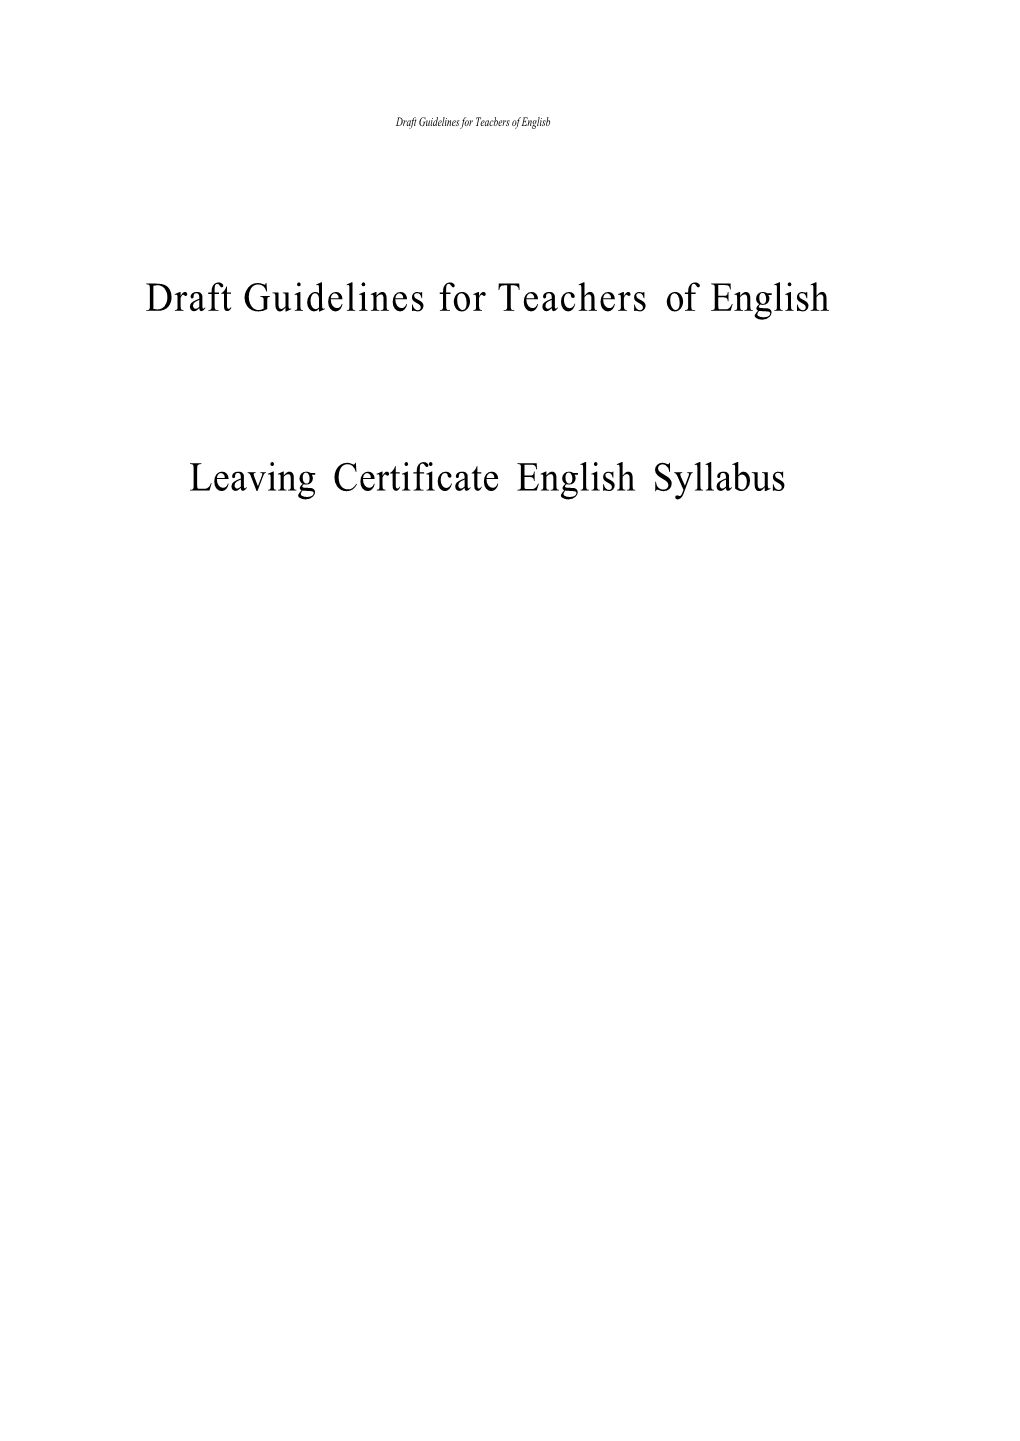 Leaving Certificate English – Guidelines For